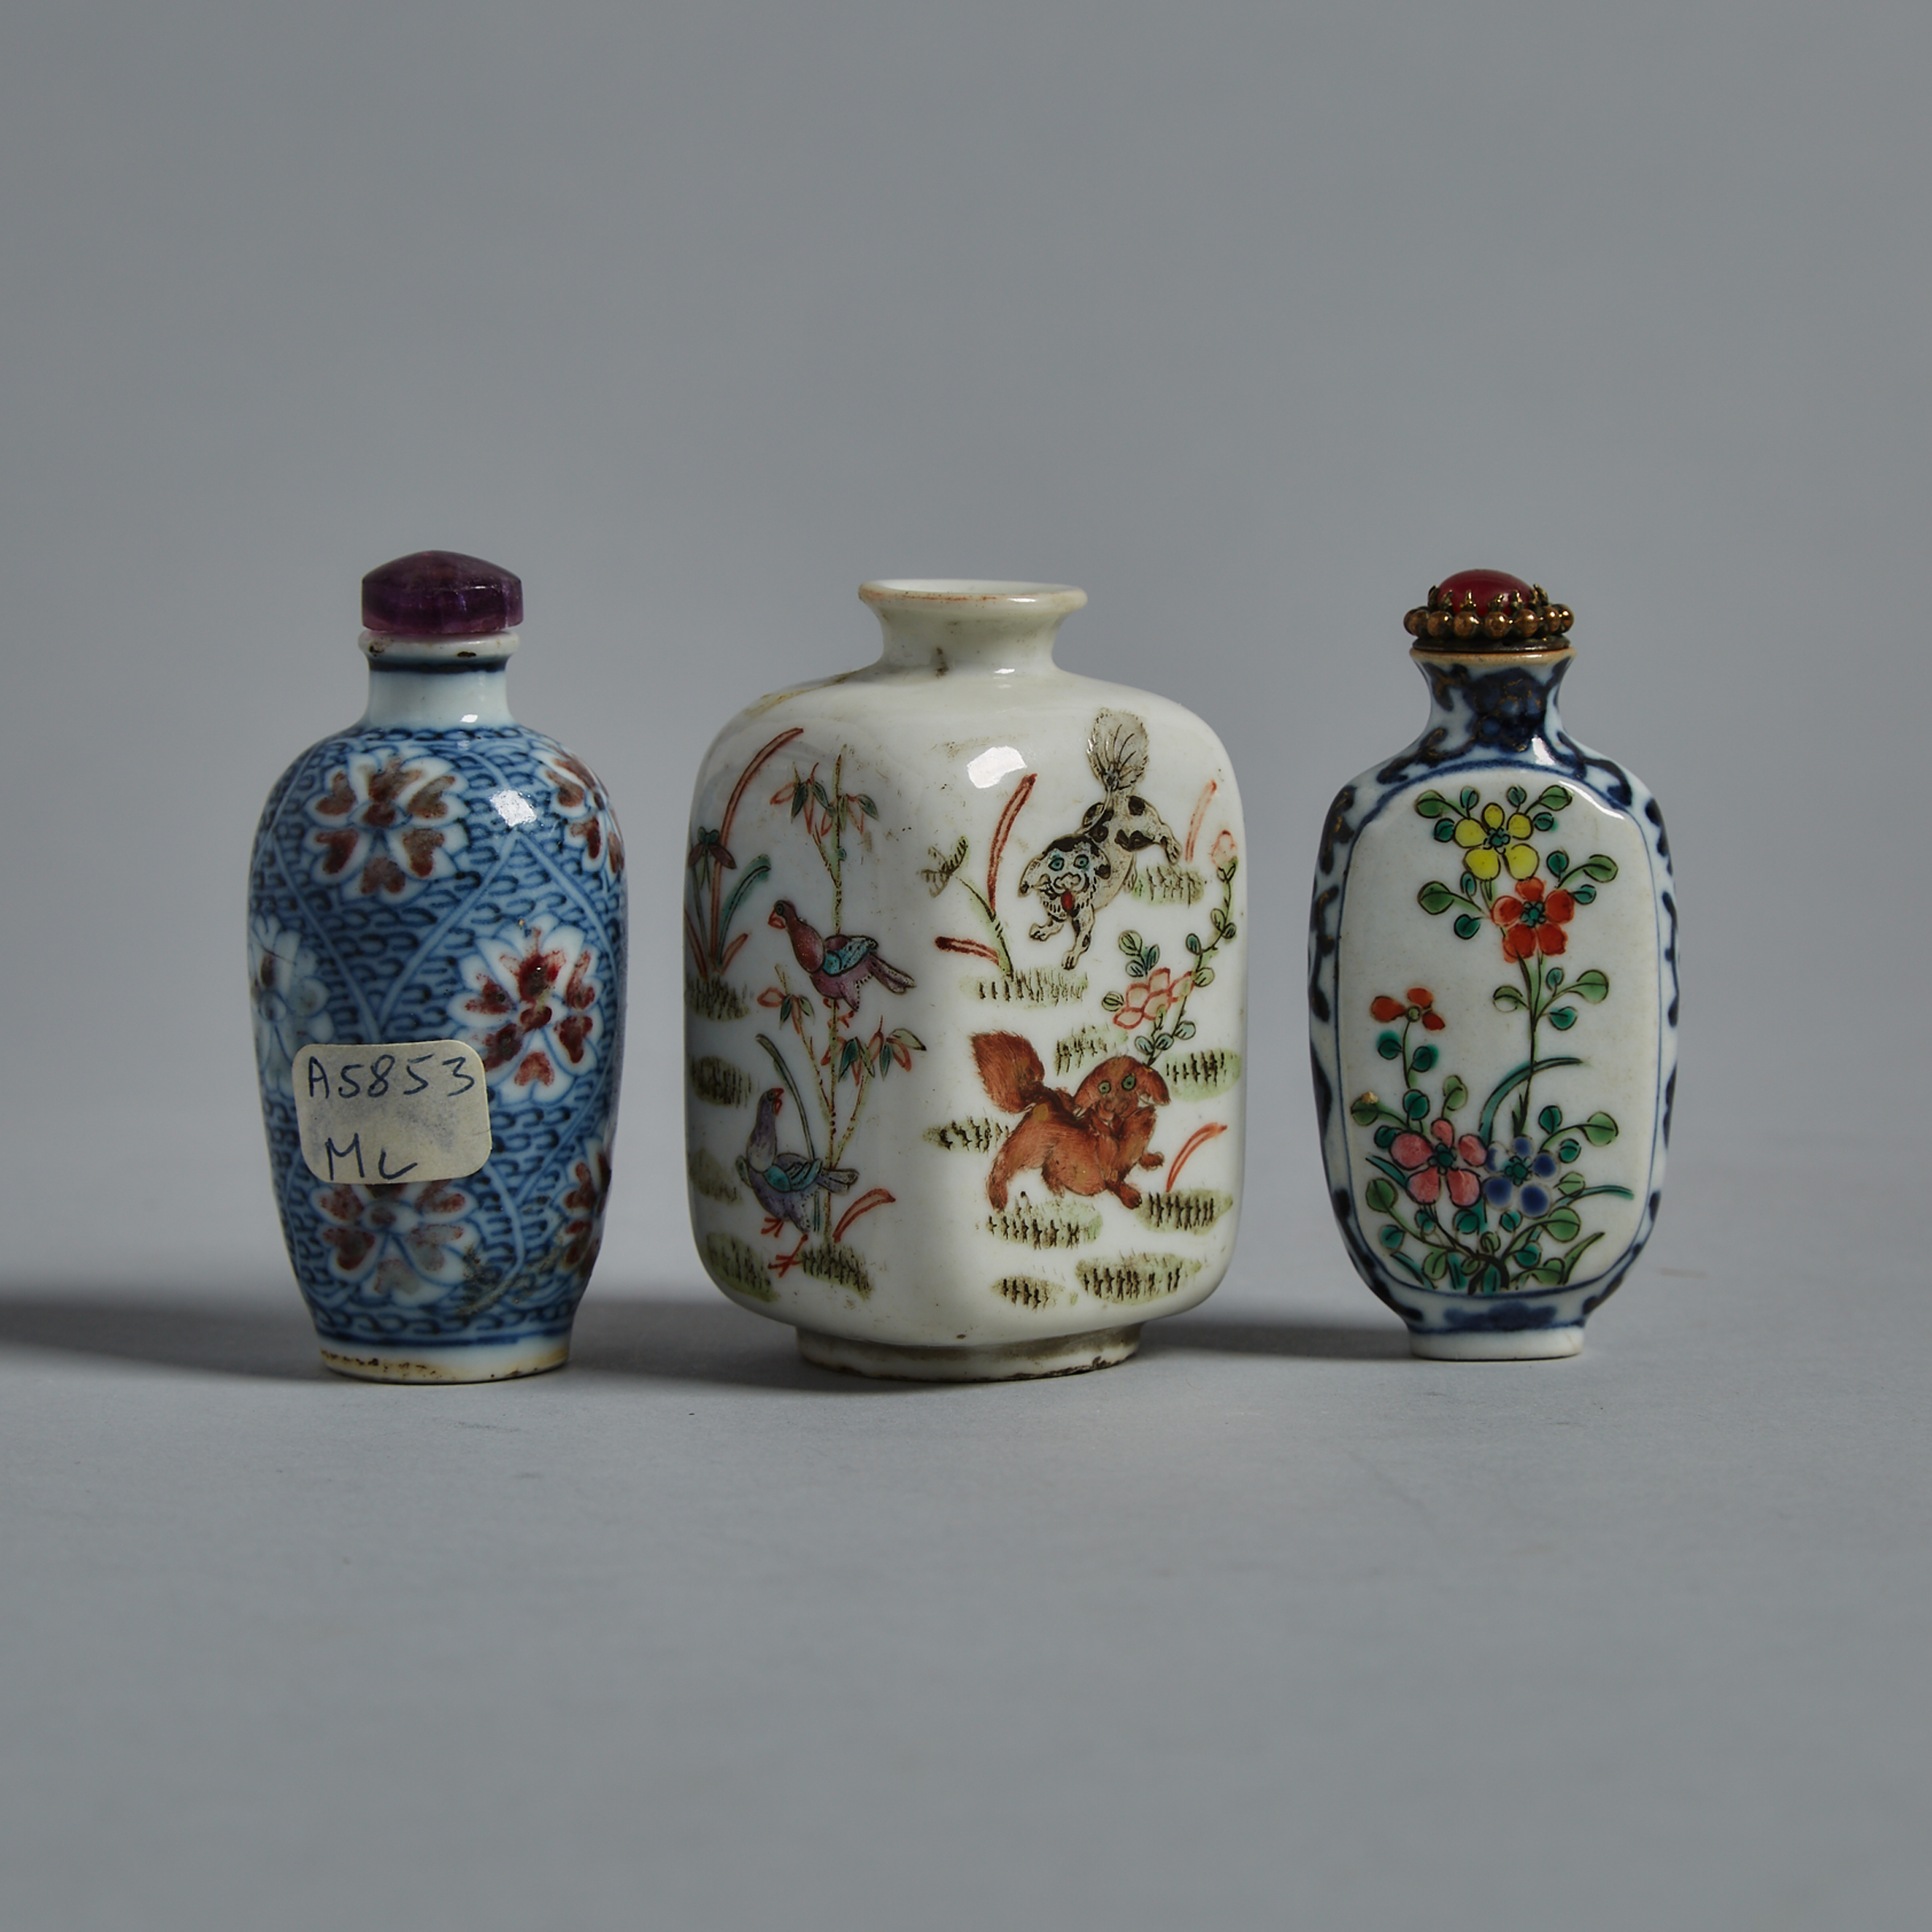 A Group of Three Porcelain Snuff Bottles